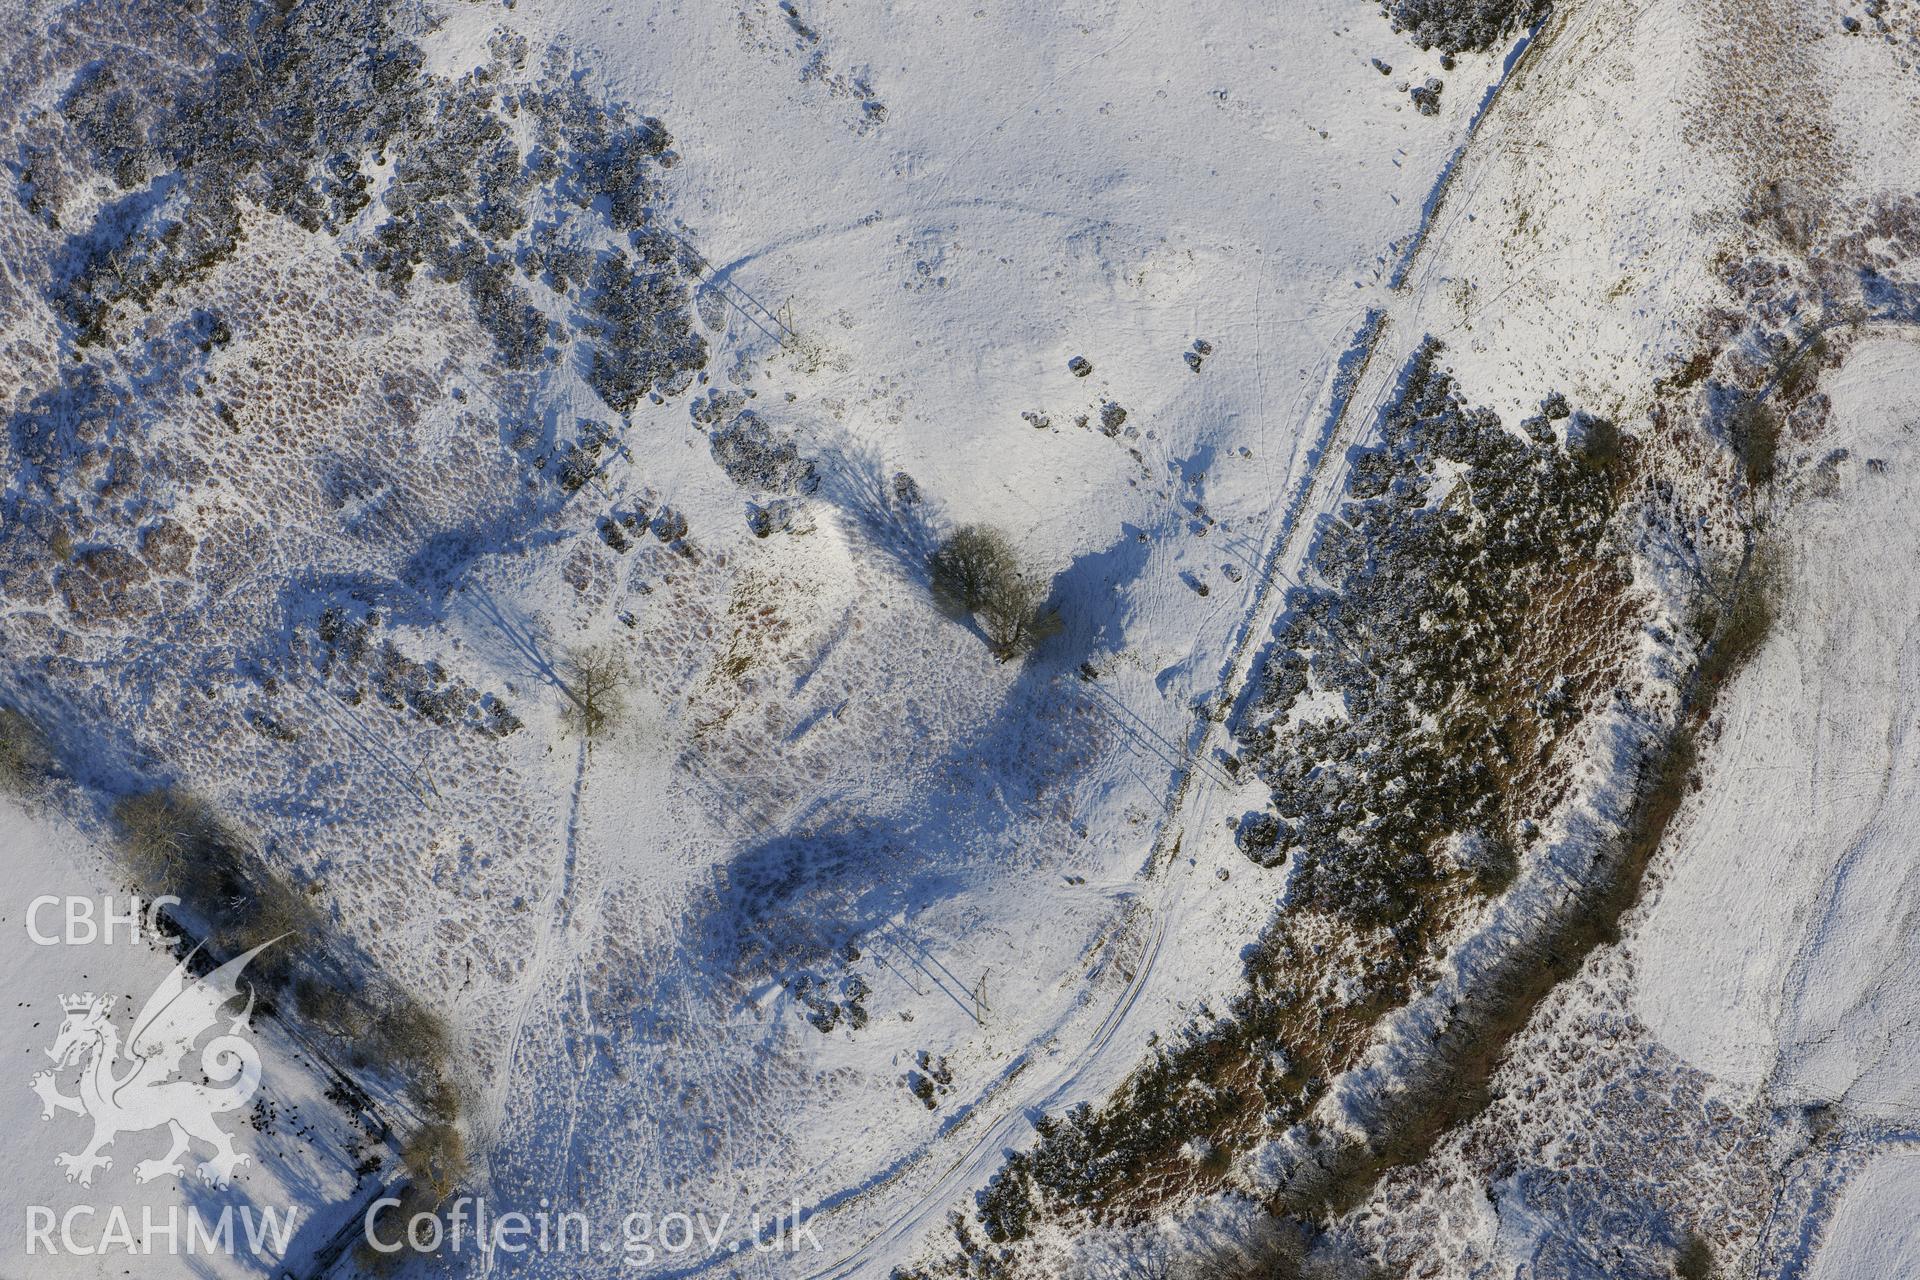 House platforms west of Gaer Fawr, north east of Builth Wells. Oblique aerial photograph taken during the Royal Commission?s programme of archaeological aerial reconnaissance by Toby Driver on 15th January 2013.